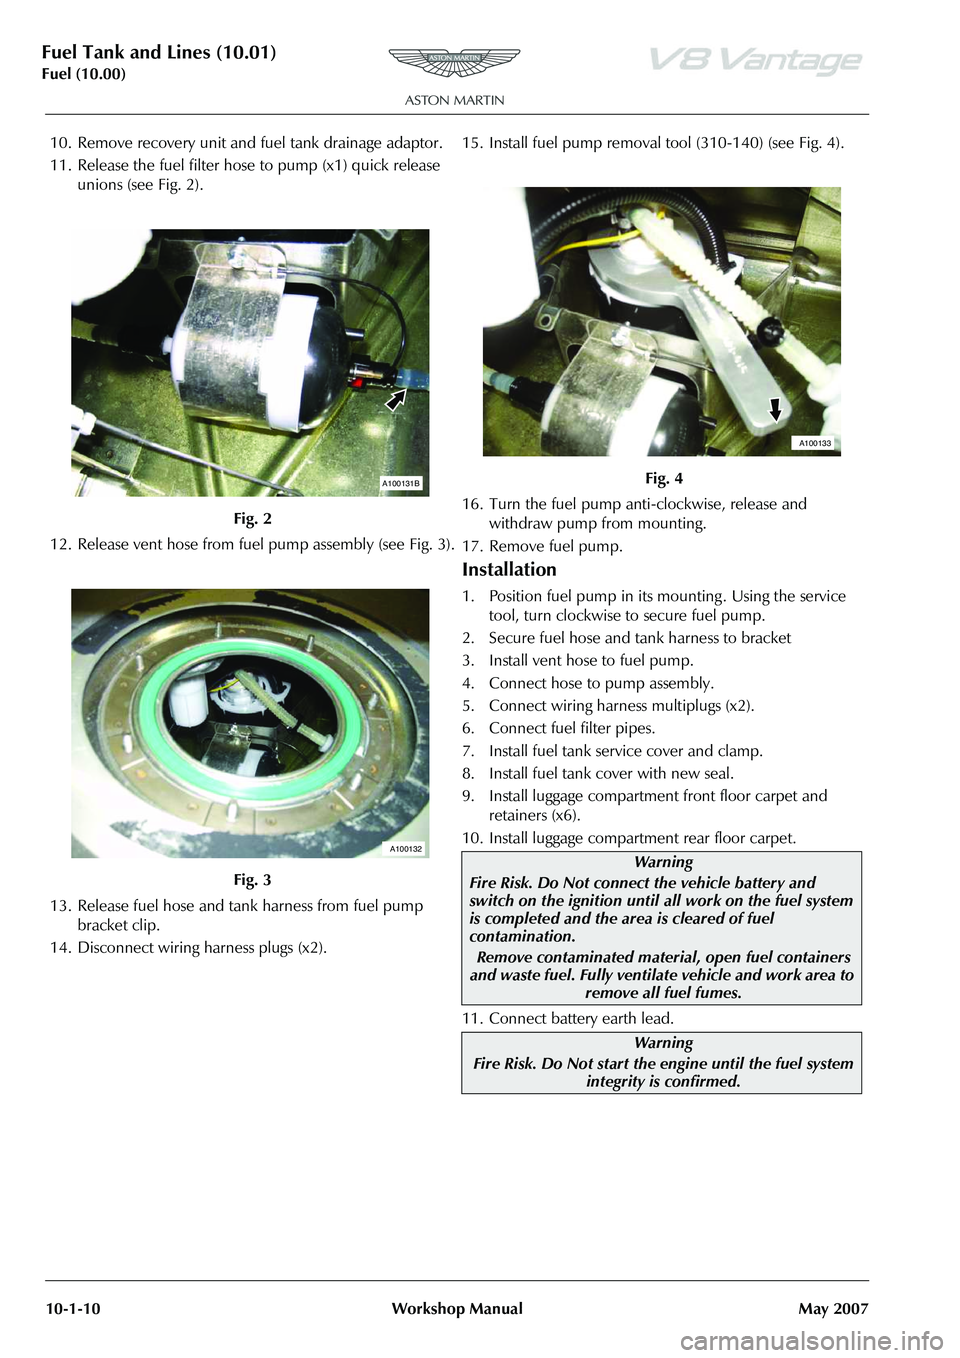 ASTON MARTIN V8 VANTAGE 2010  Workshop Manual Fuel Tank and Lines (10.01)
Fuel (10.00)10-1-10 Workshop  Manual May 2007
10. Remove recovery unit and fuel tank drainage adaptor.
11. Release the fuel filter hose to pump (x1) quick release 
unions (